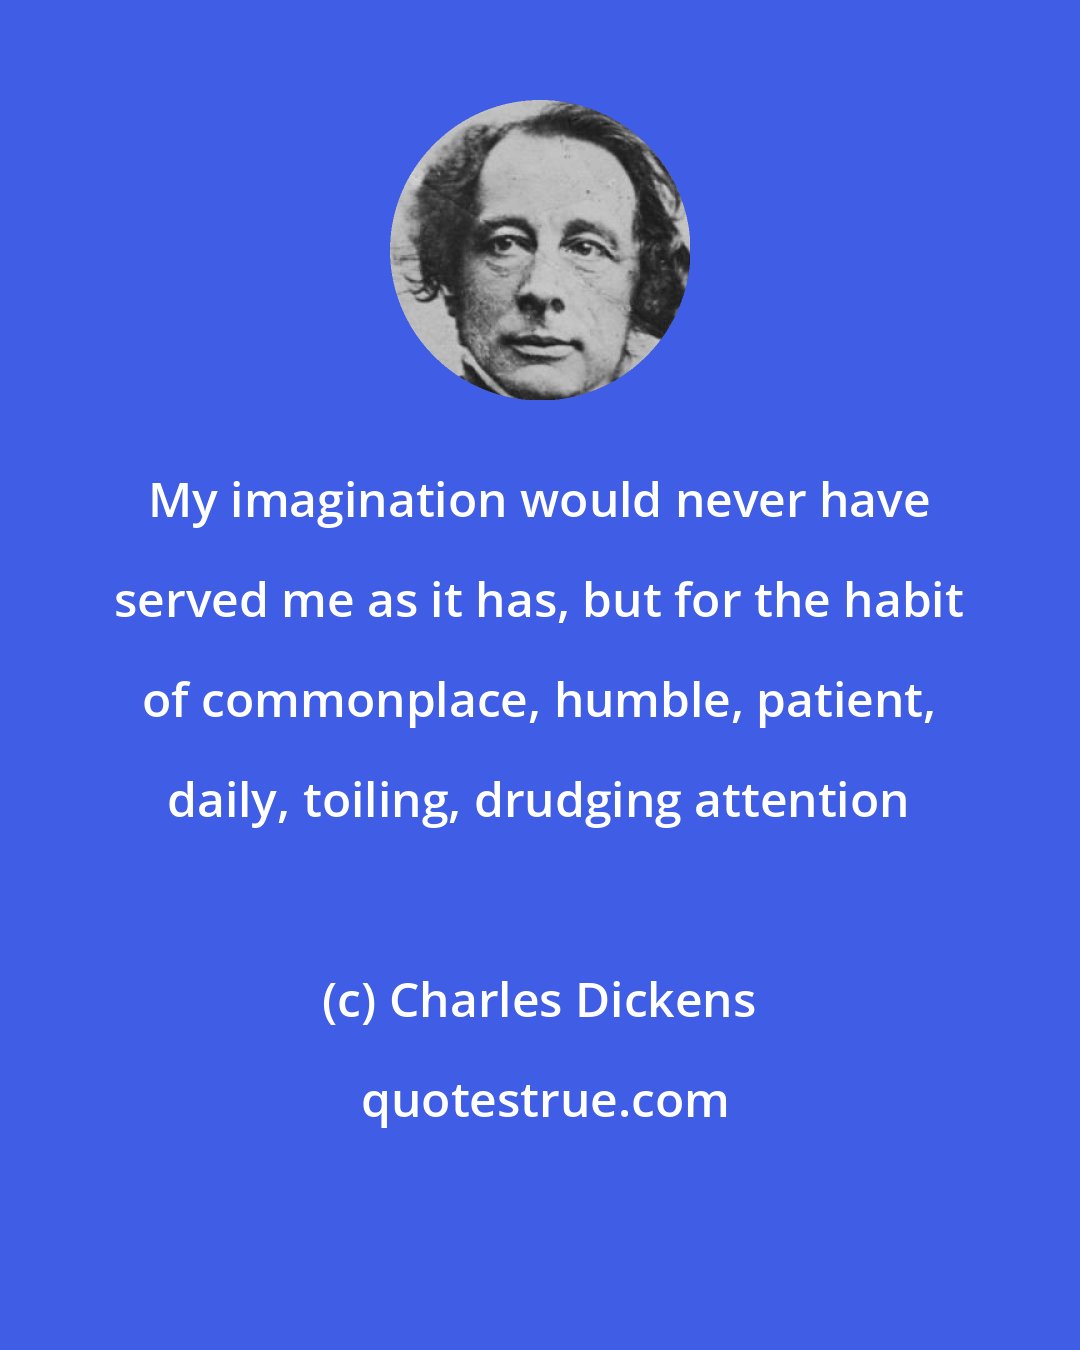 Charles Dickens: My imagination would never have served me as it has, but for the habit of commonplace, humble, patient, daily, toiling, drudging attention